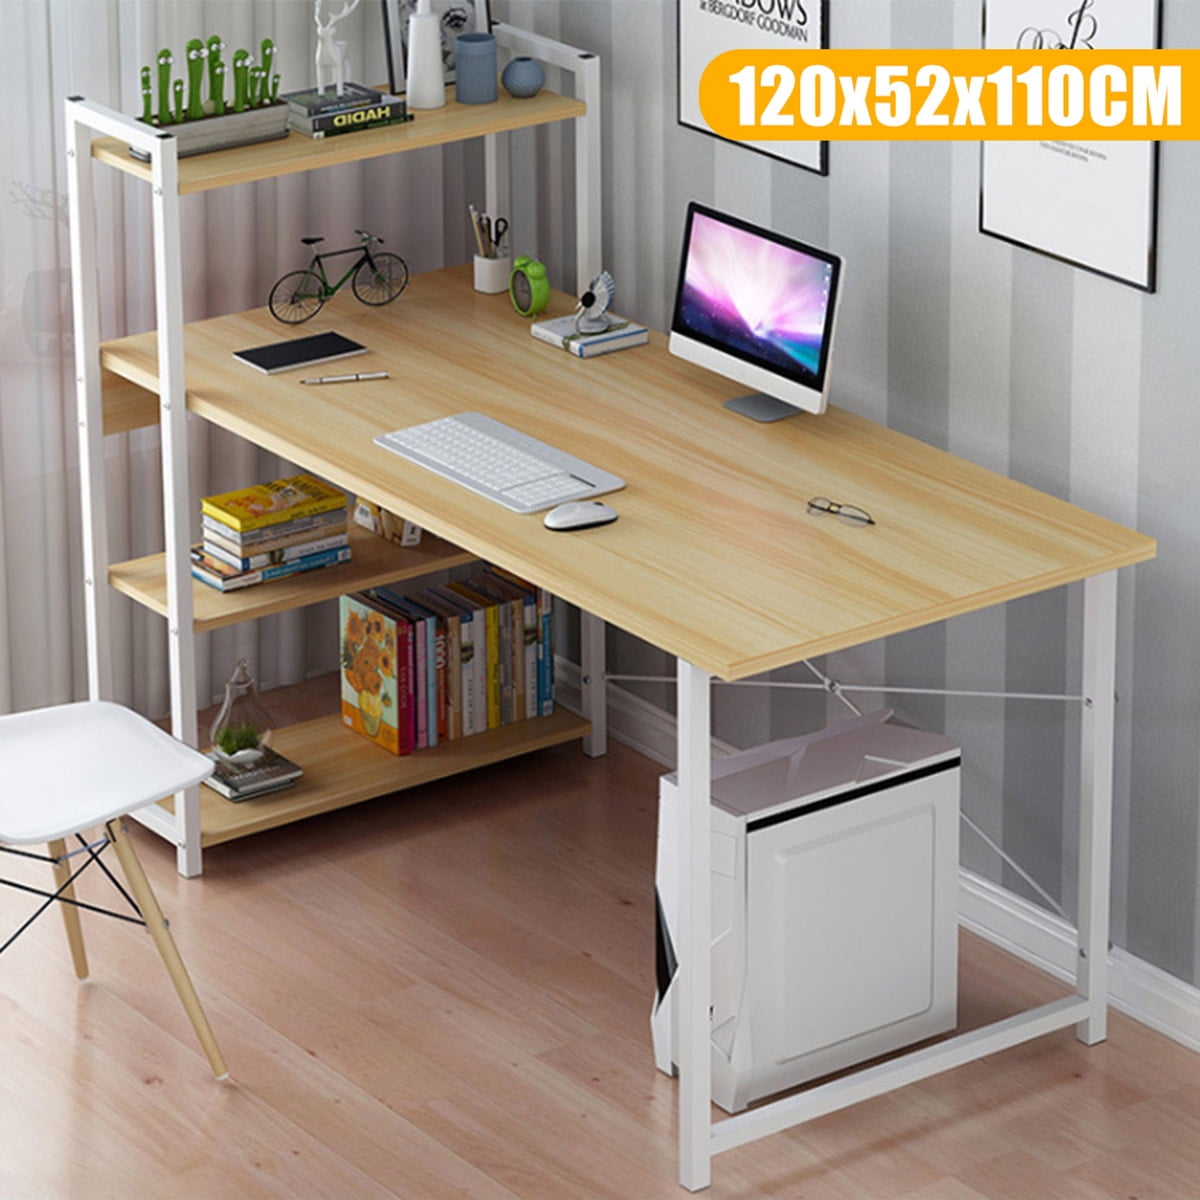 47.2” Children Desk Kids Study Desk Home Computer Table With Shelf Office table 